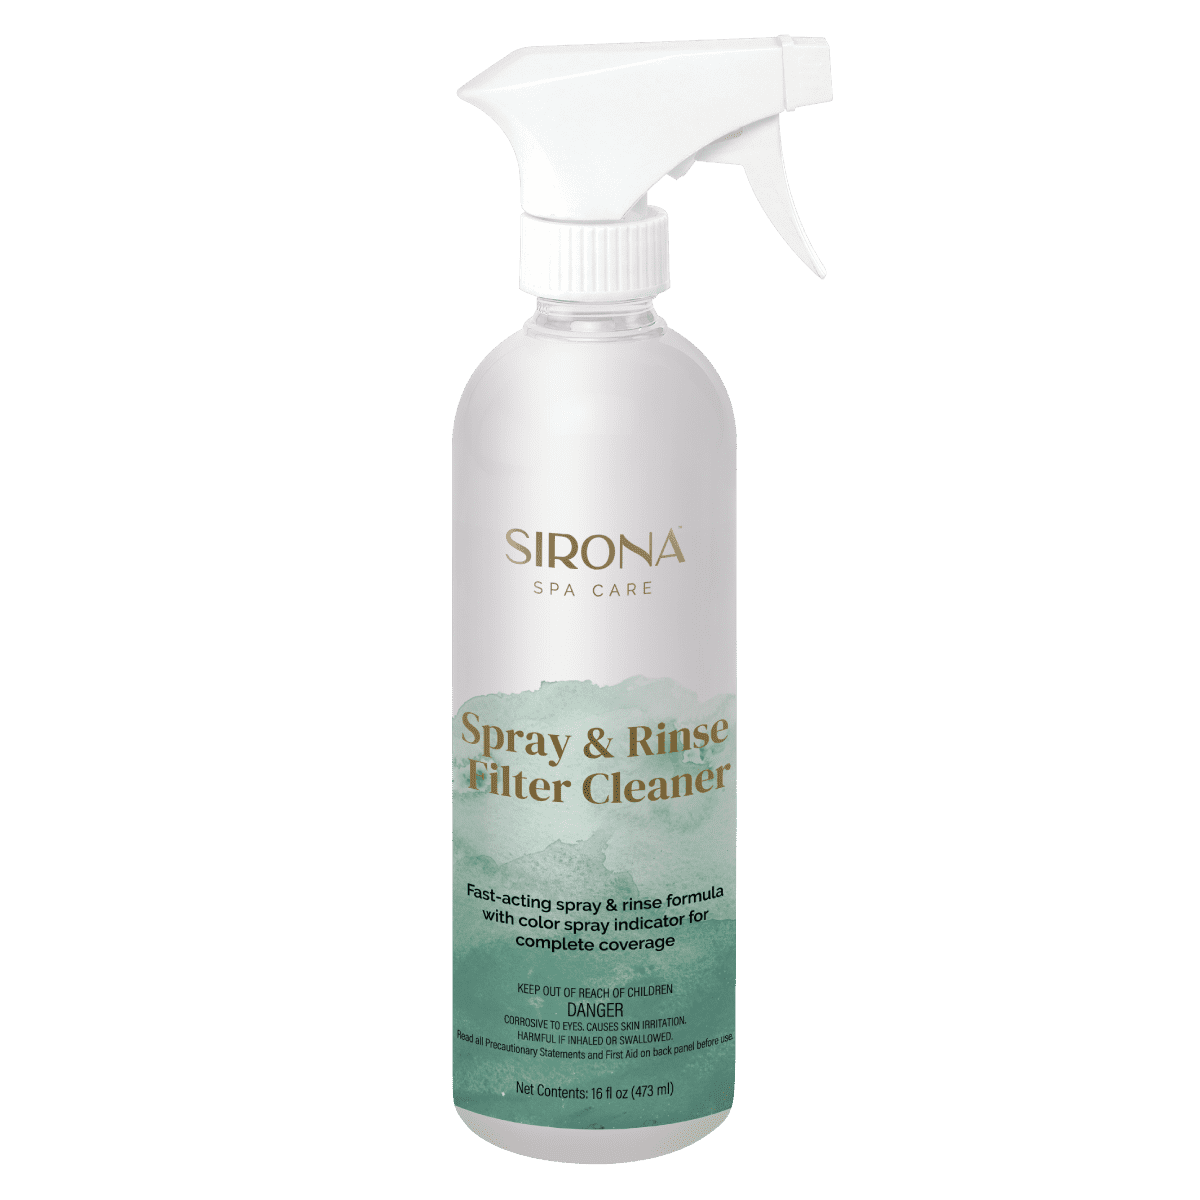 Sirona Spa Care Spray & Rinse Cartridge Filter Cleaner